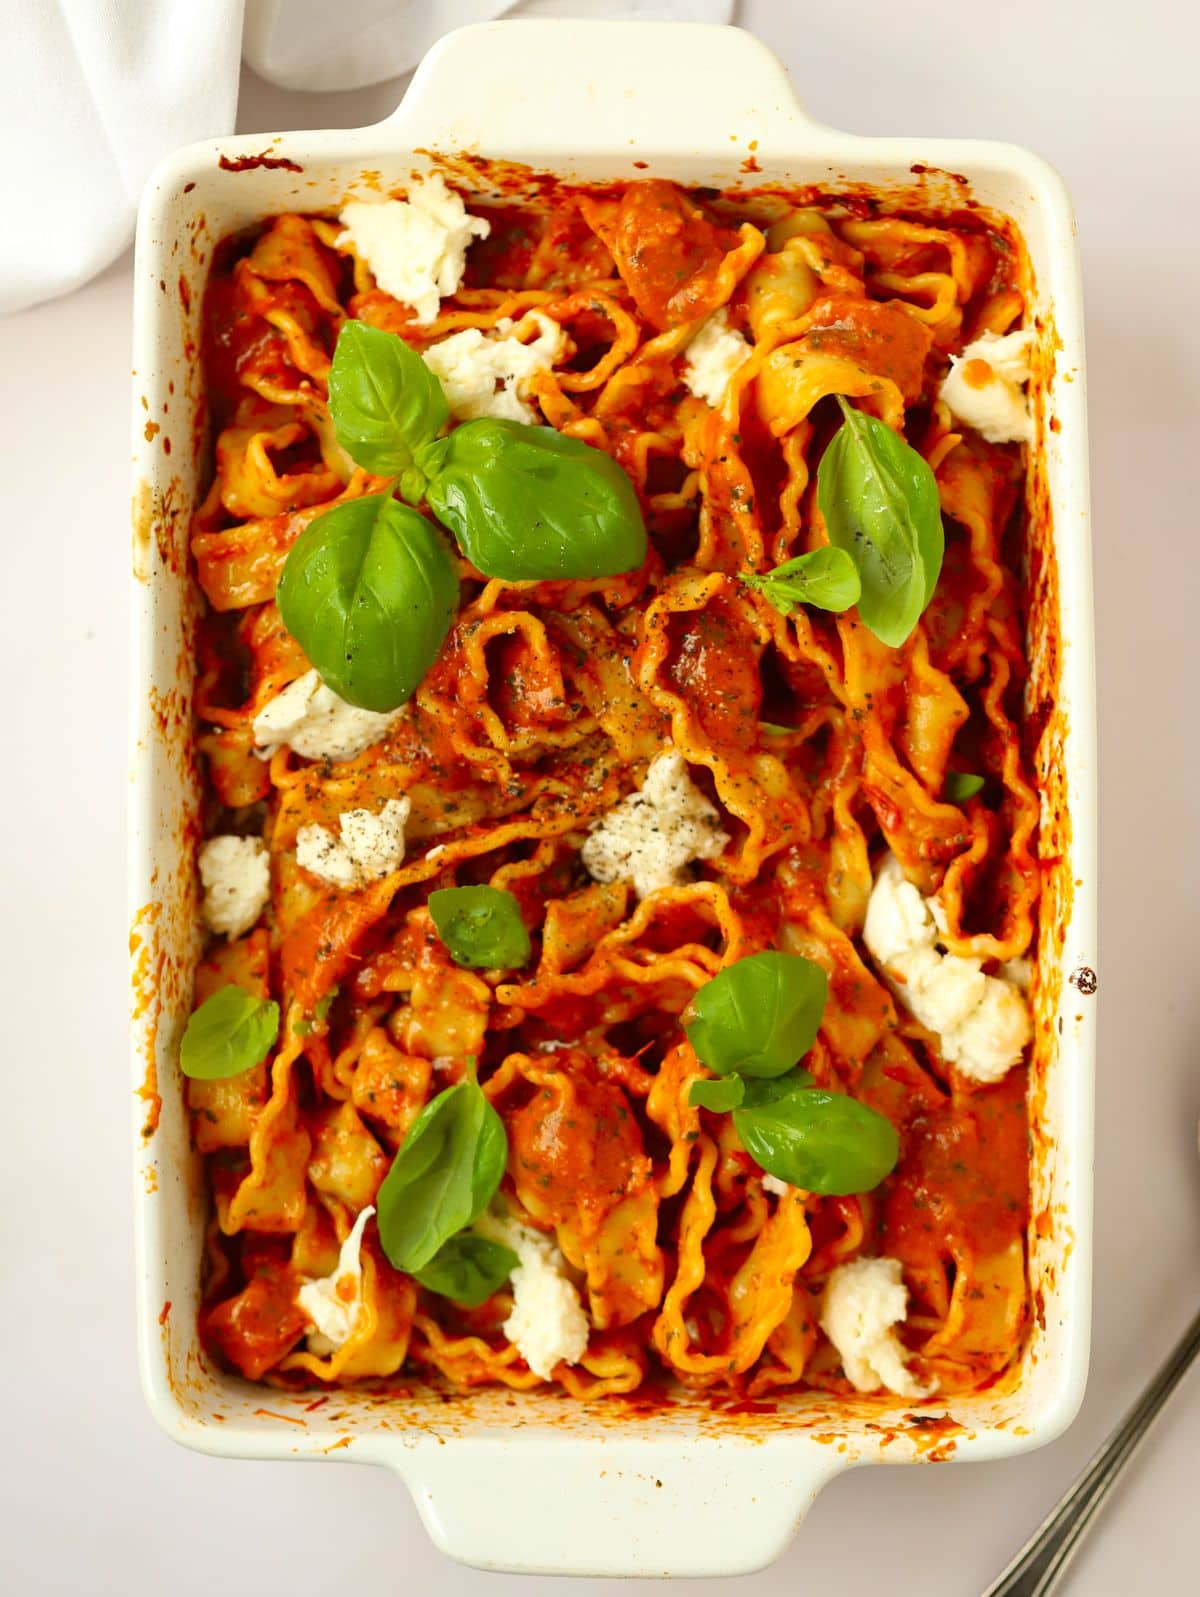 An oven dish filled with tomato and basil pasta, topped with mozzarella.